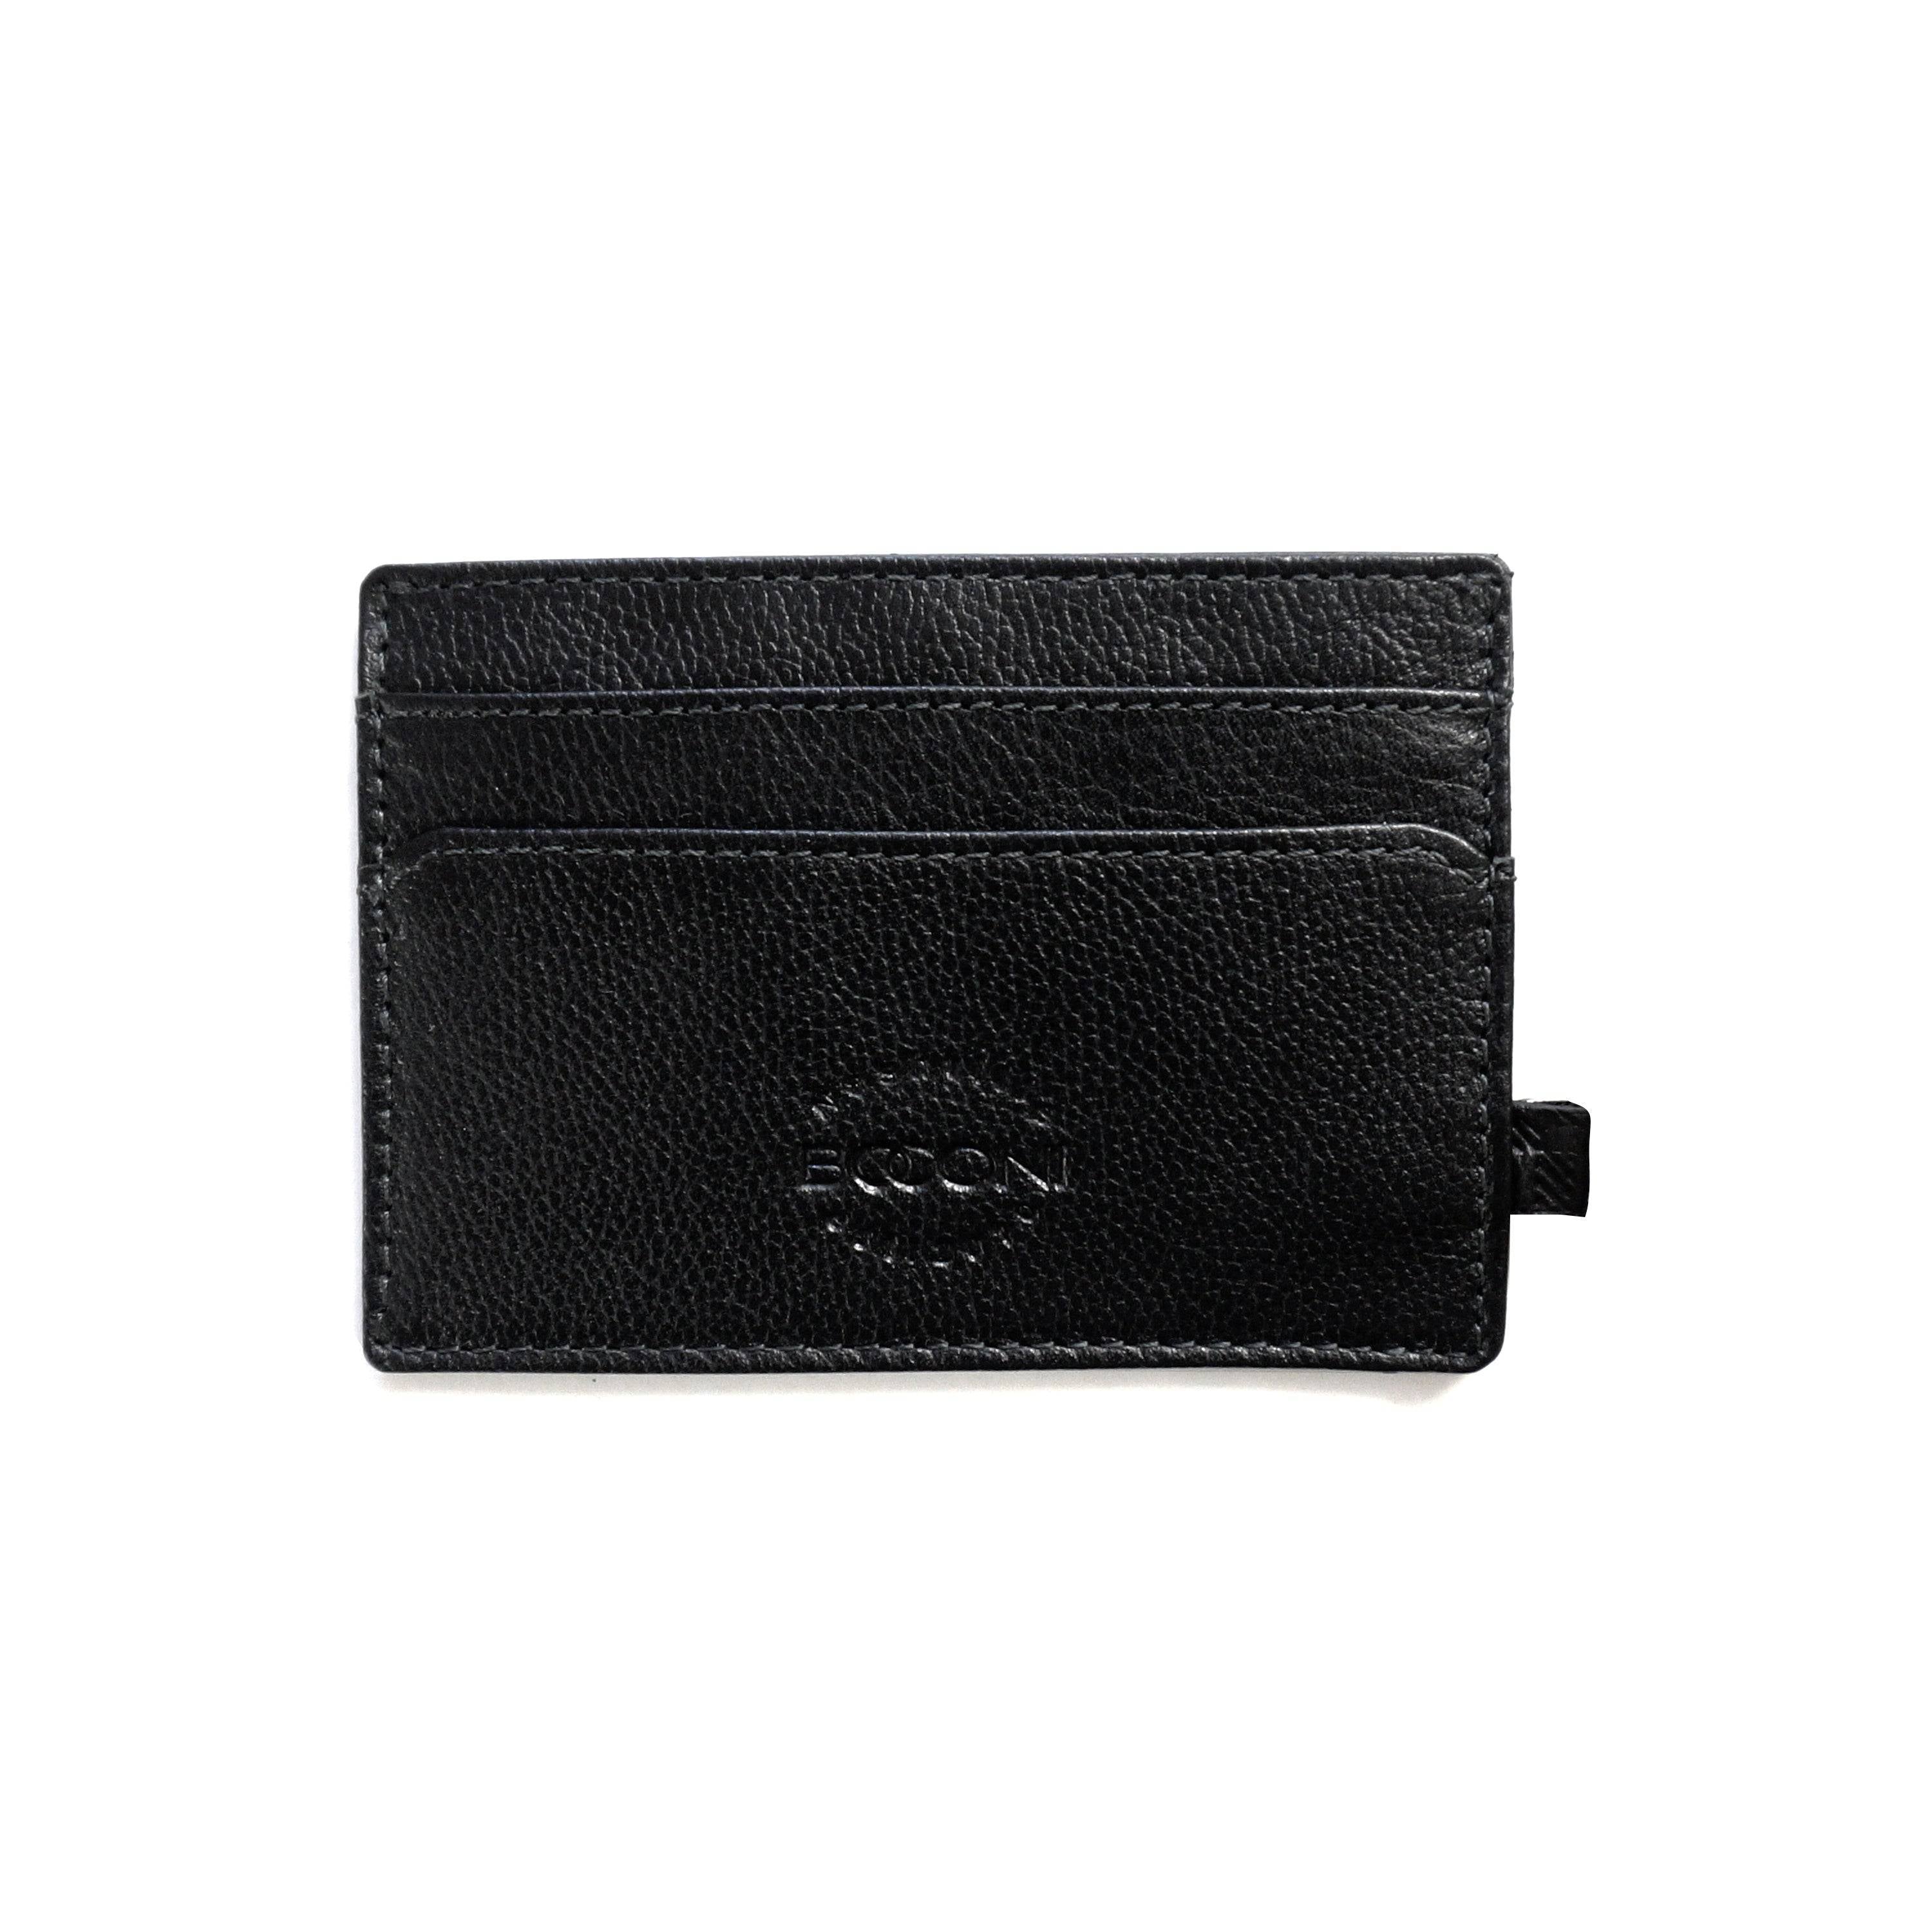 a black leather card case on a white background